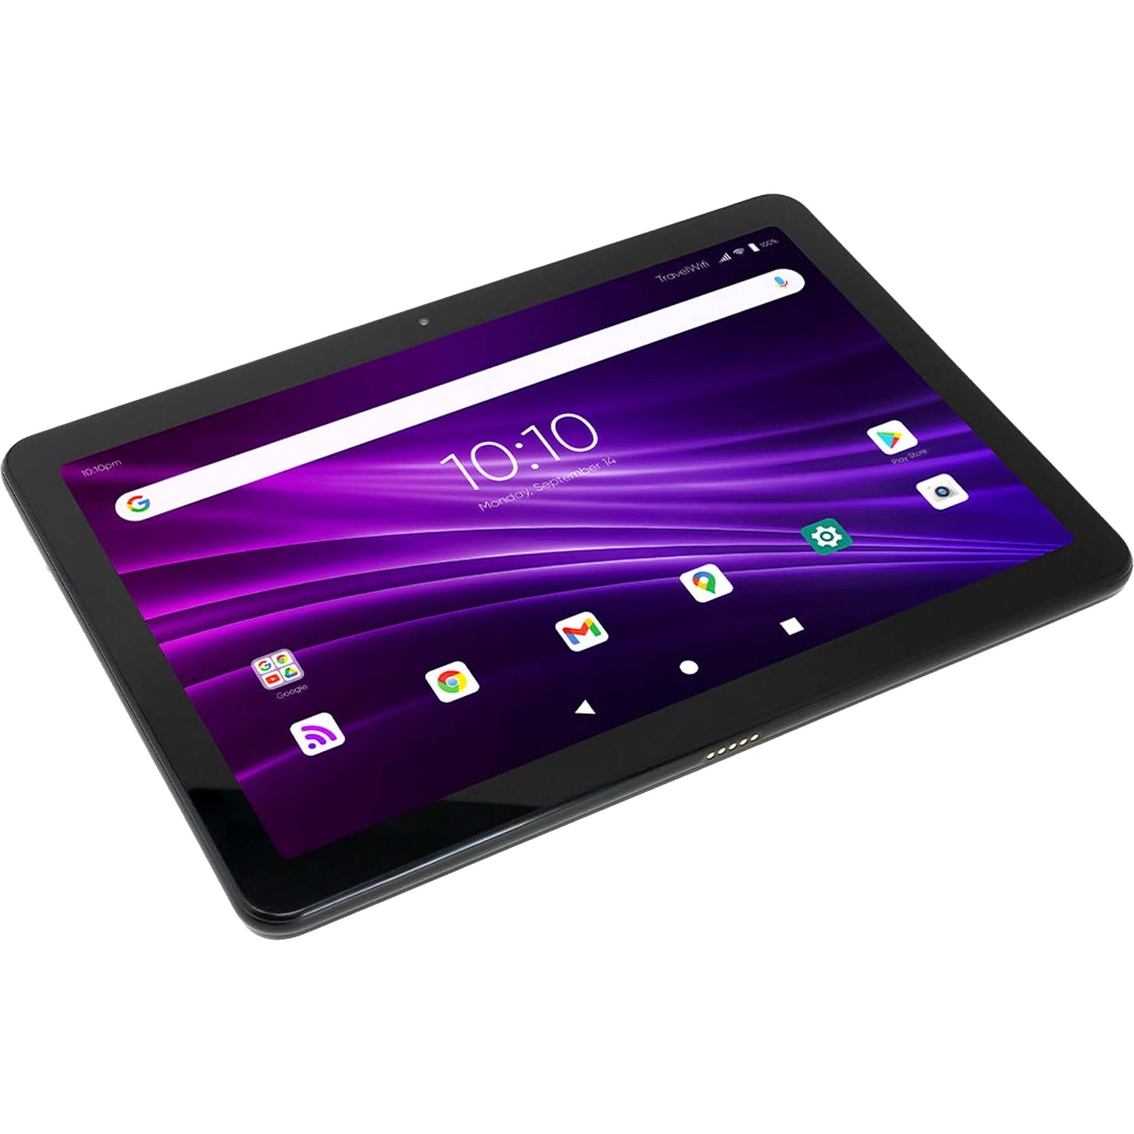 Sapphire 10 in. Android Hotspot Tablet - Image 3 of 5